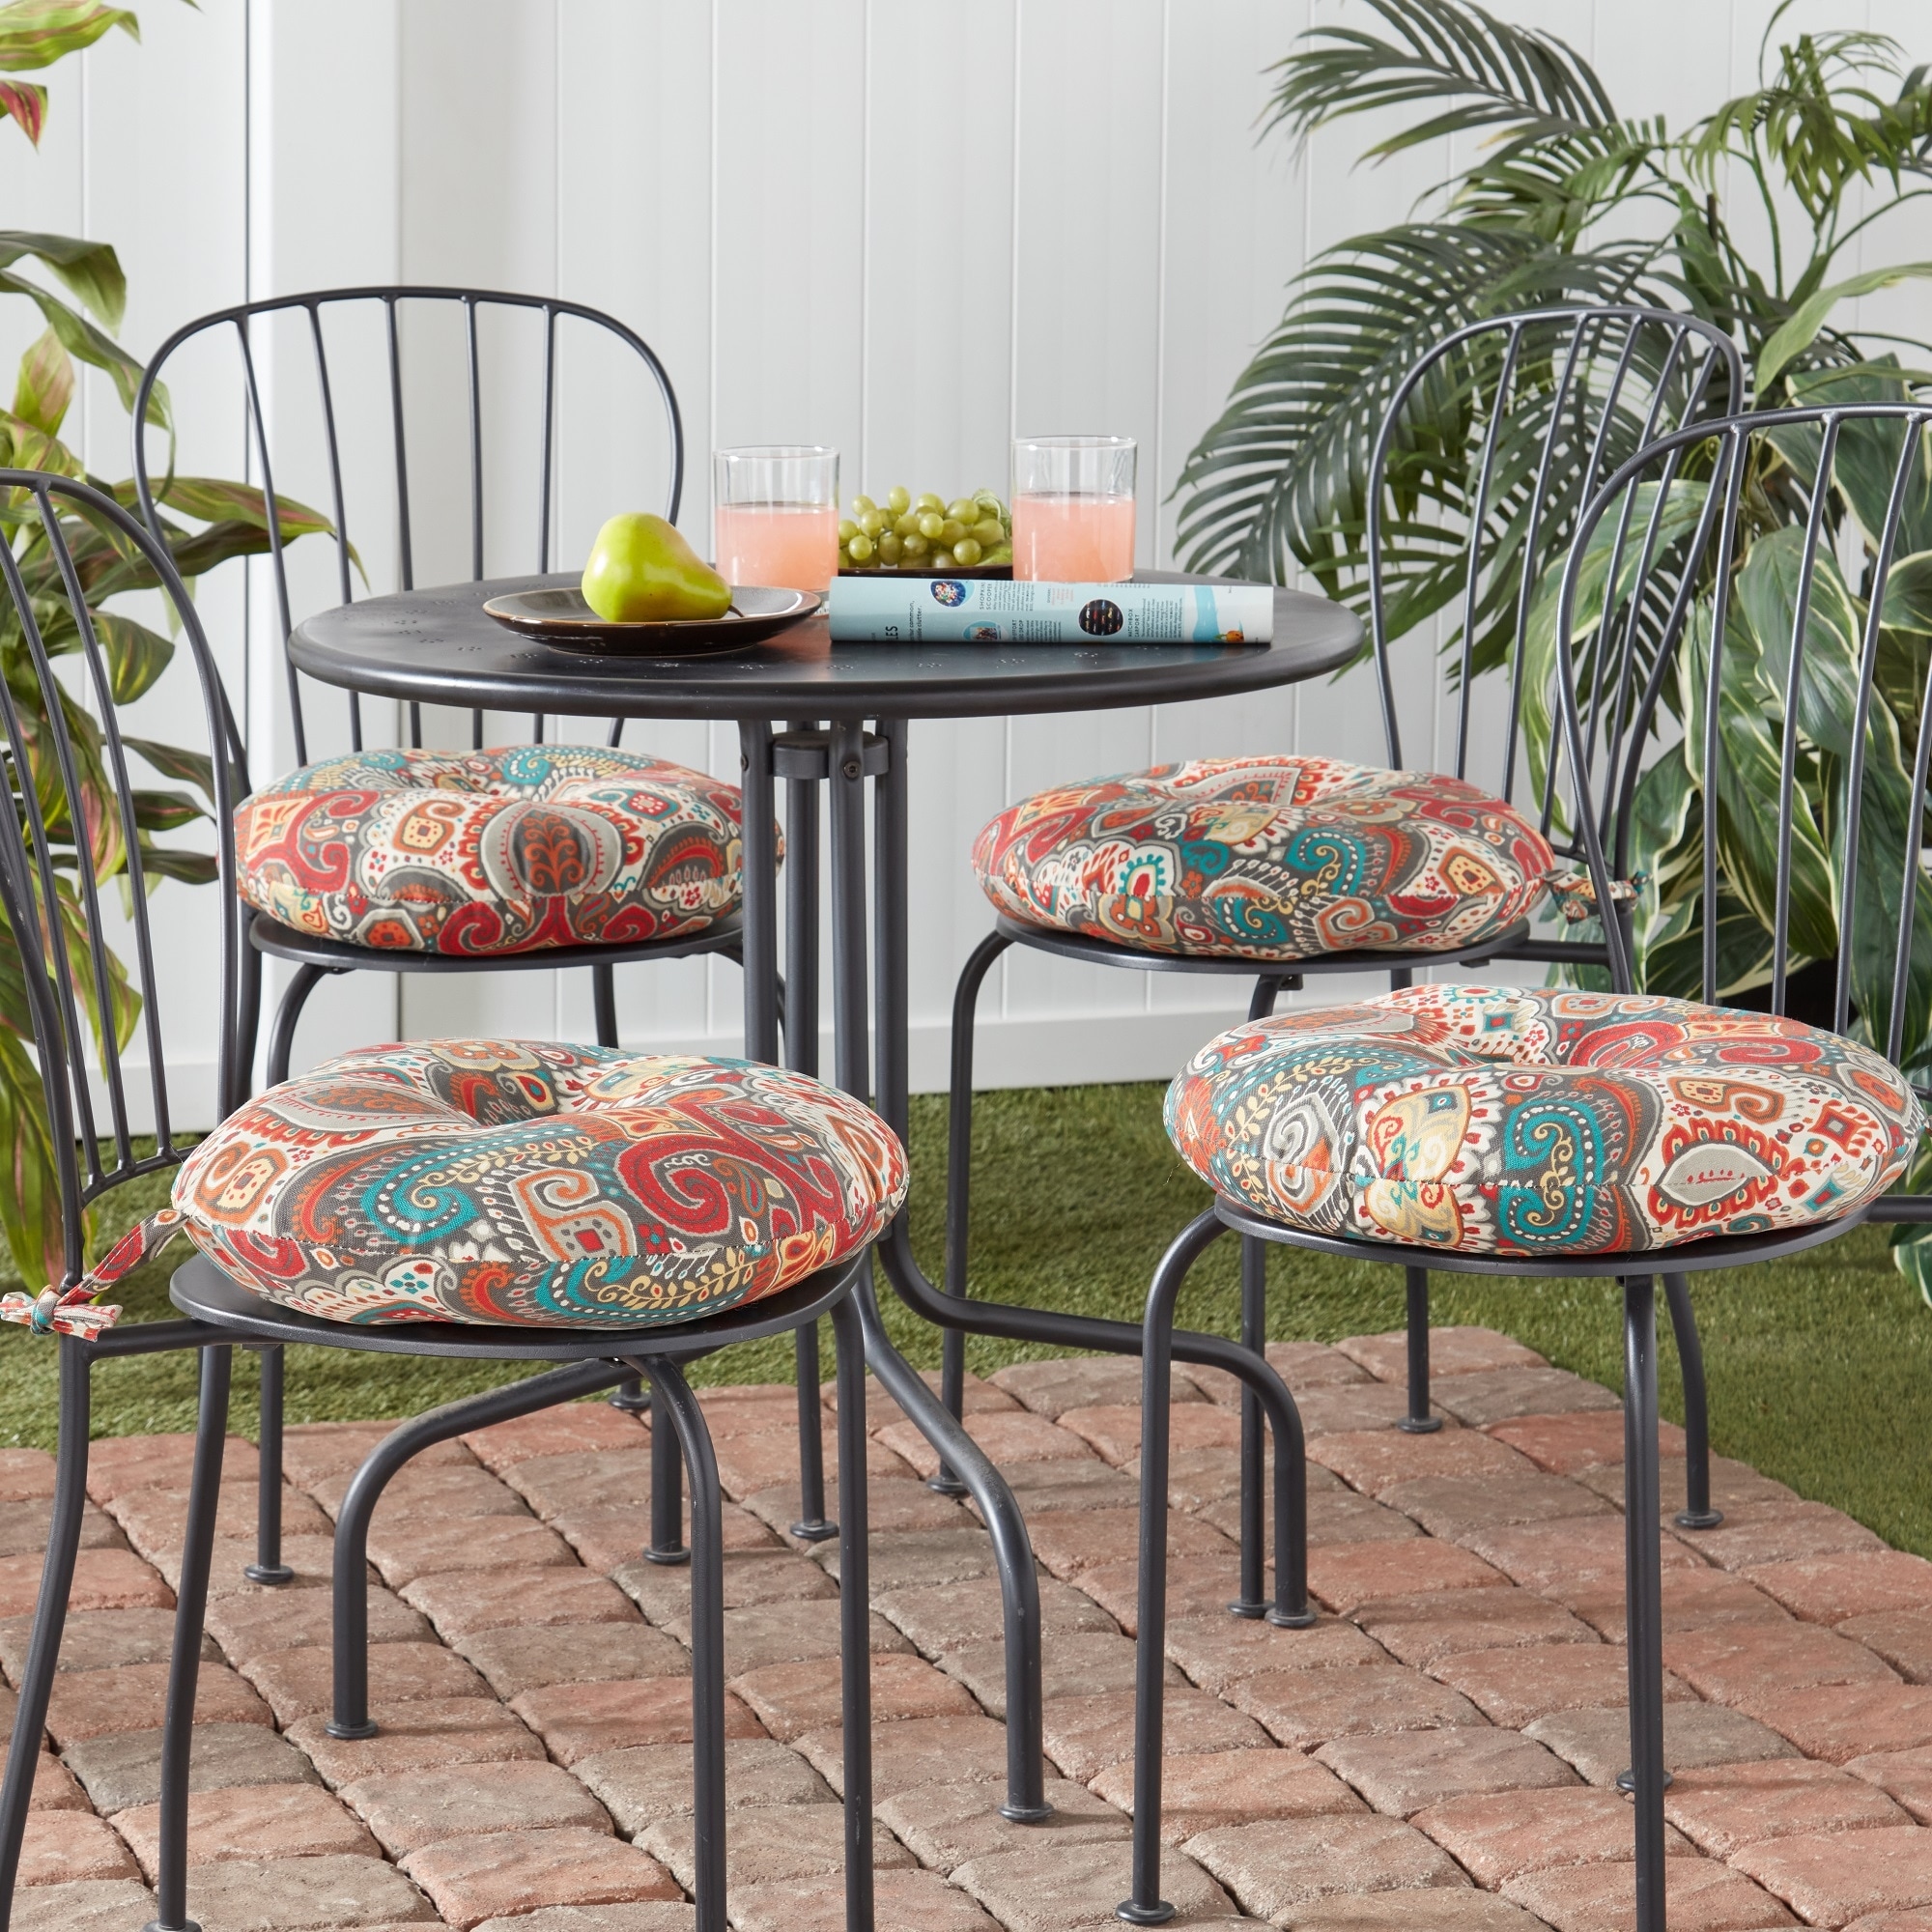 https://ak1.ostkcdn.com/images/products/is/images/direct/963f481895e1c1d6c221a23a42d7ace09db4942d/Greendale-Home-Fashions-Multicolor-Outdoor-Round-Bistro-Dining-Seat-Cushion-%28Set-of-2%29.jpg